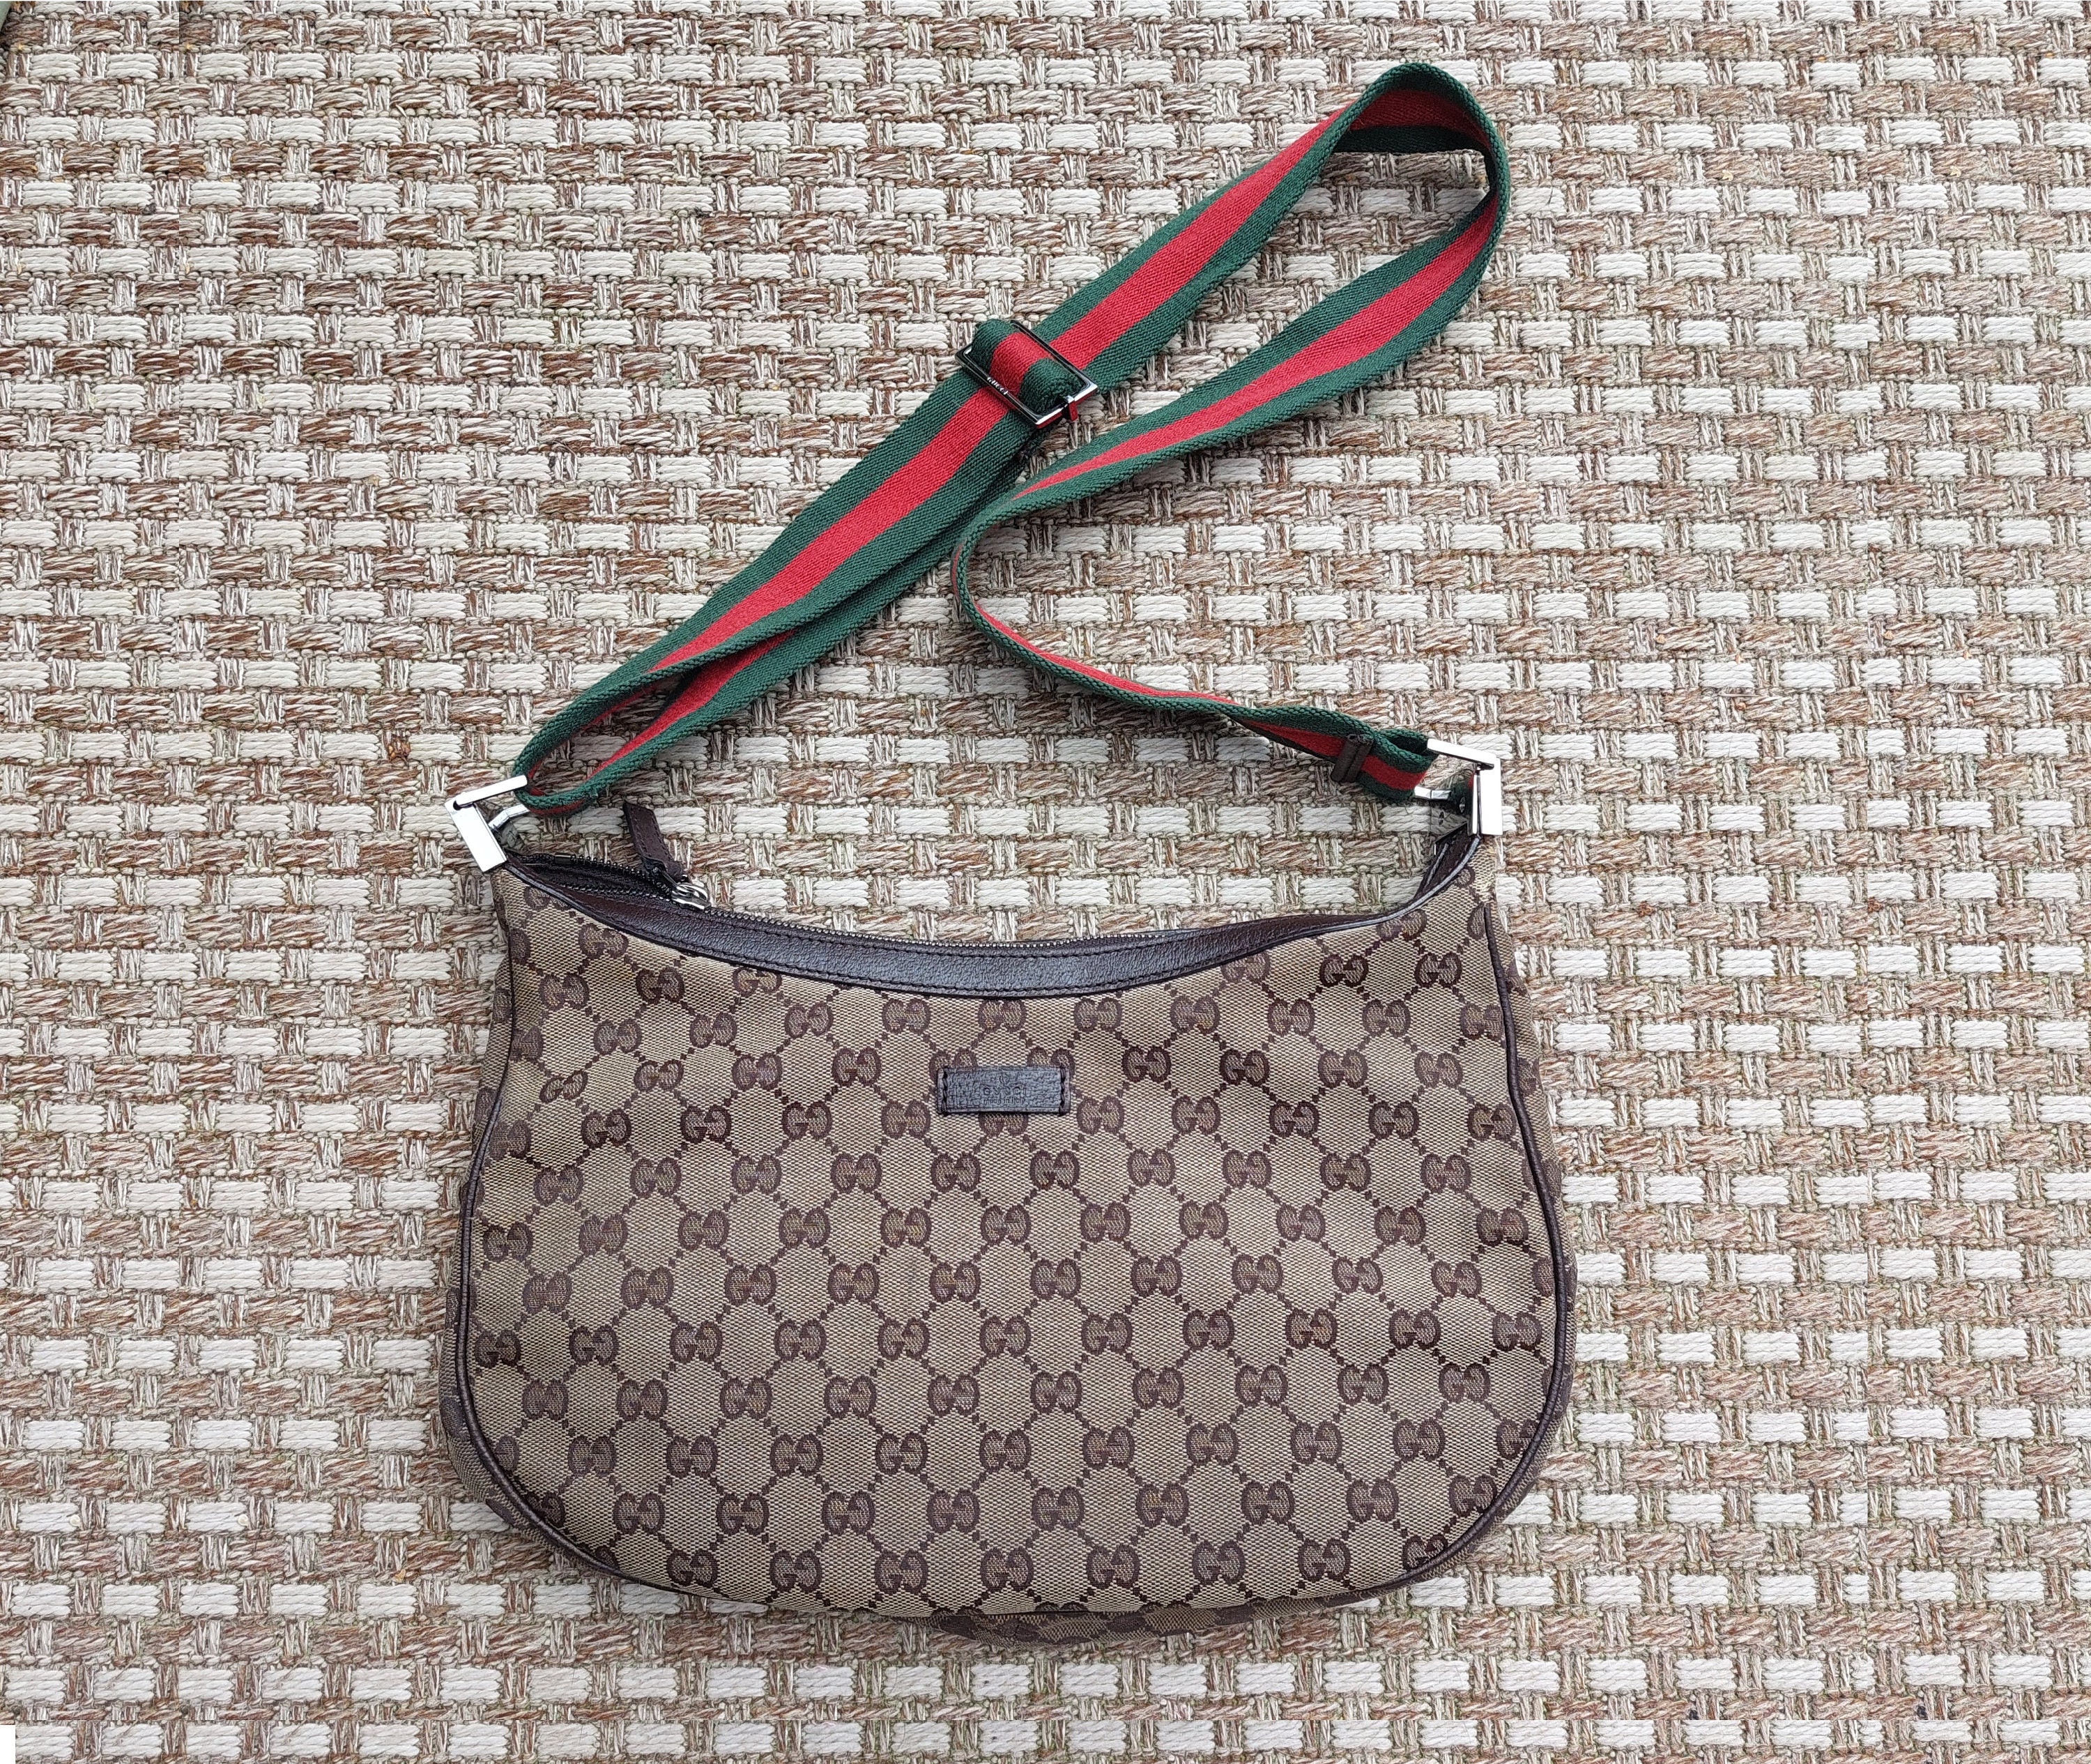 Vintage Gucci black leather classic design handbag purse with G hardwa –  eNdApPi ***where you can find your favorite designer  vintages..authentic, affordable, and lovable.